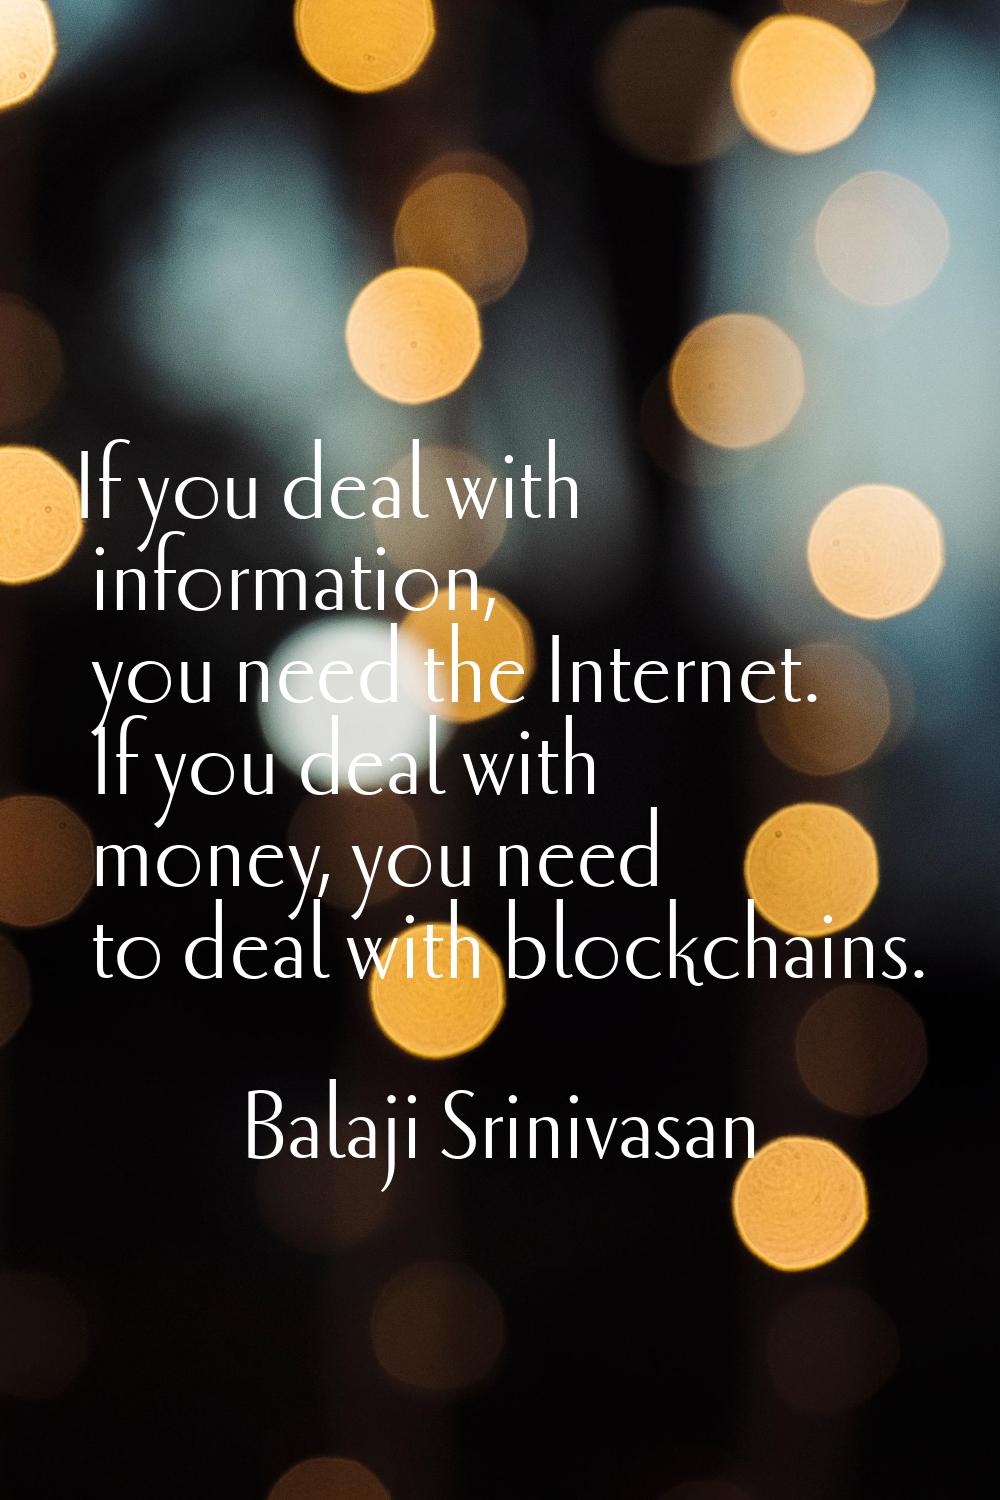 If you deal with information, you need the Internet. If you deal with money, you need to deal with 